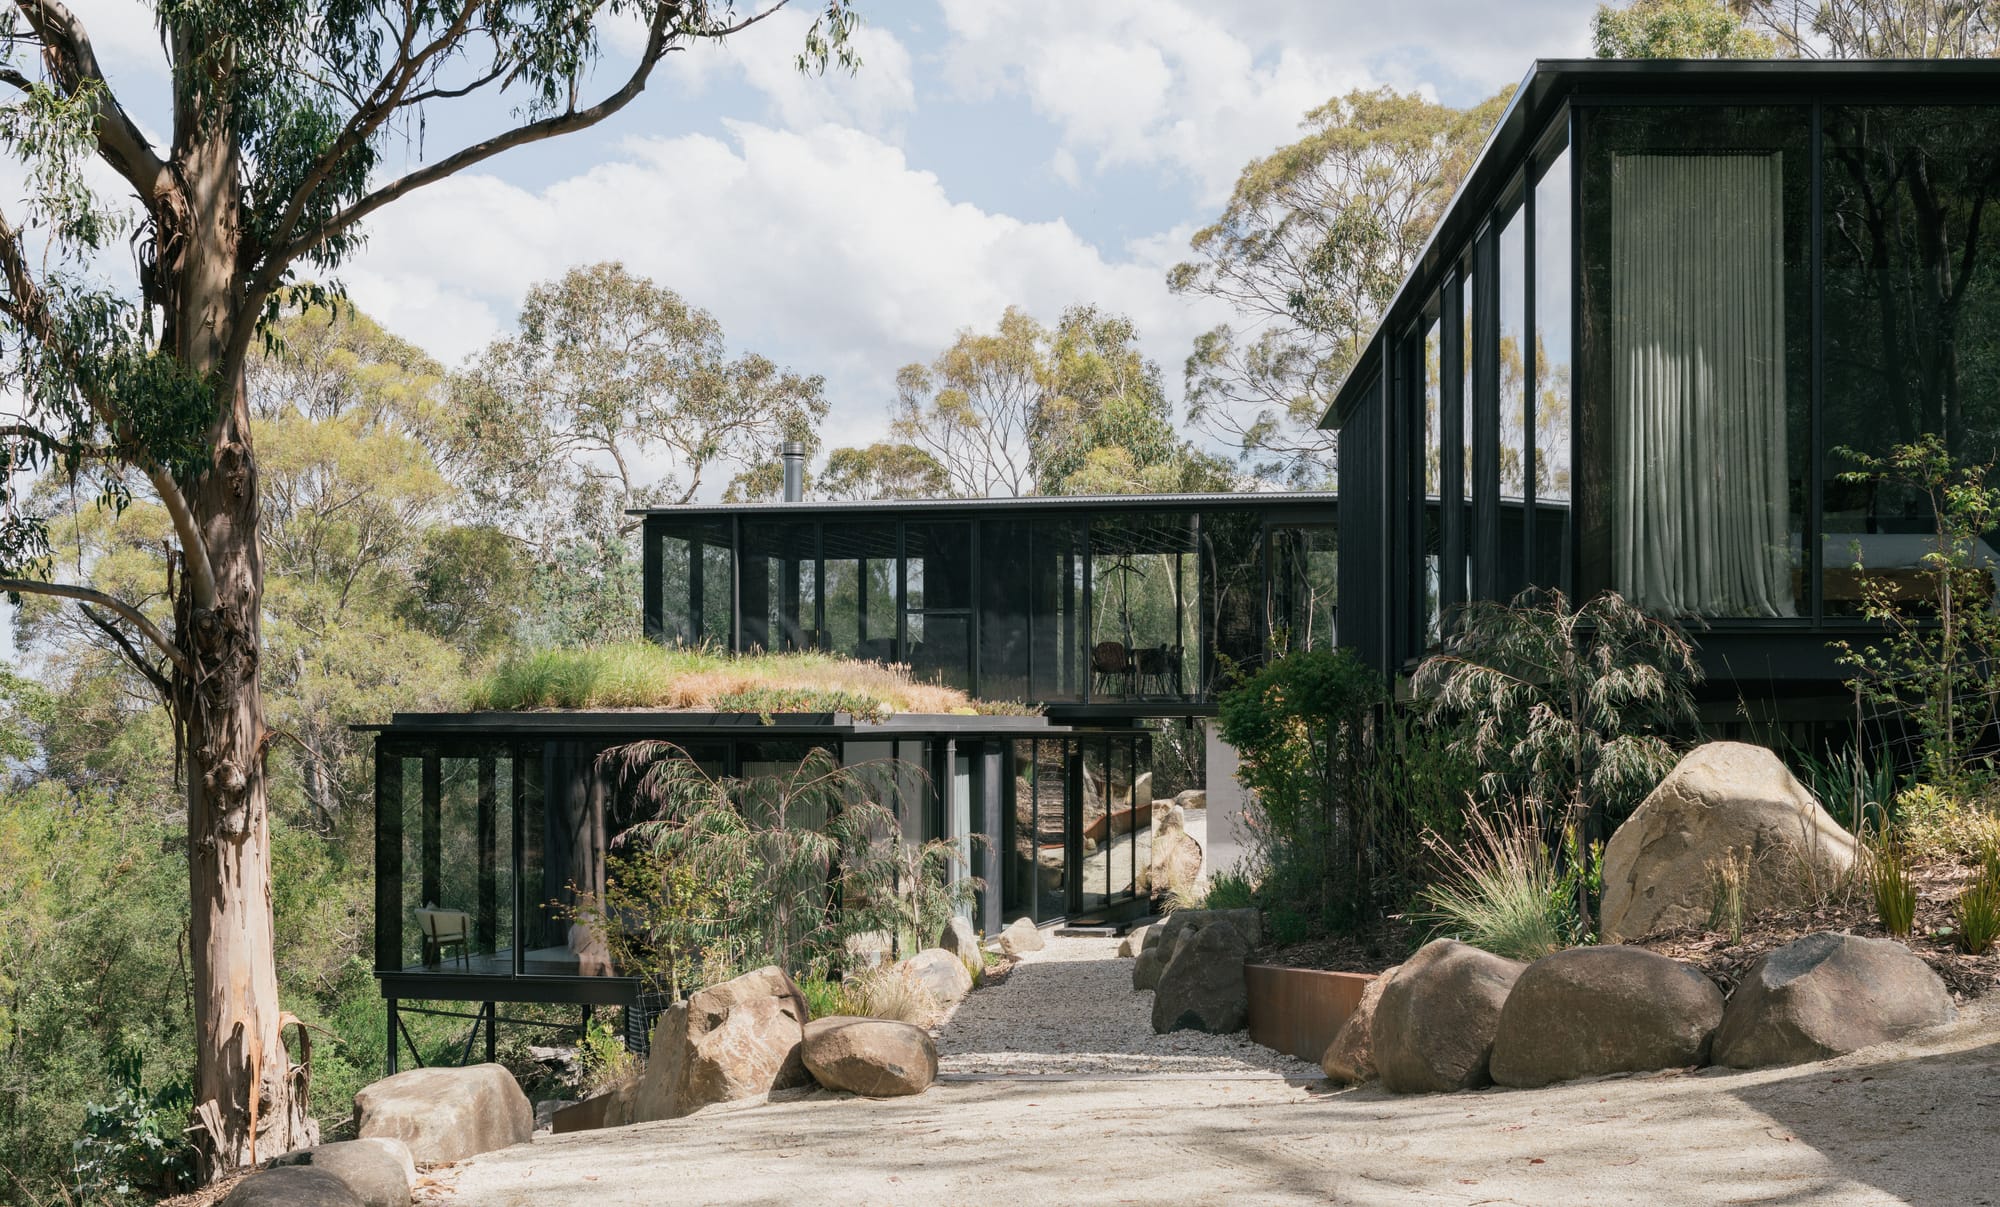 Taroona House by Archier. Photography by Thurston Empson. Residential home constructed of dark framed floor-to-ceiling glass windows. Three distinct rectangular structures arranged in native bushland with stone pathway leading towards. 